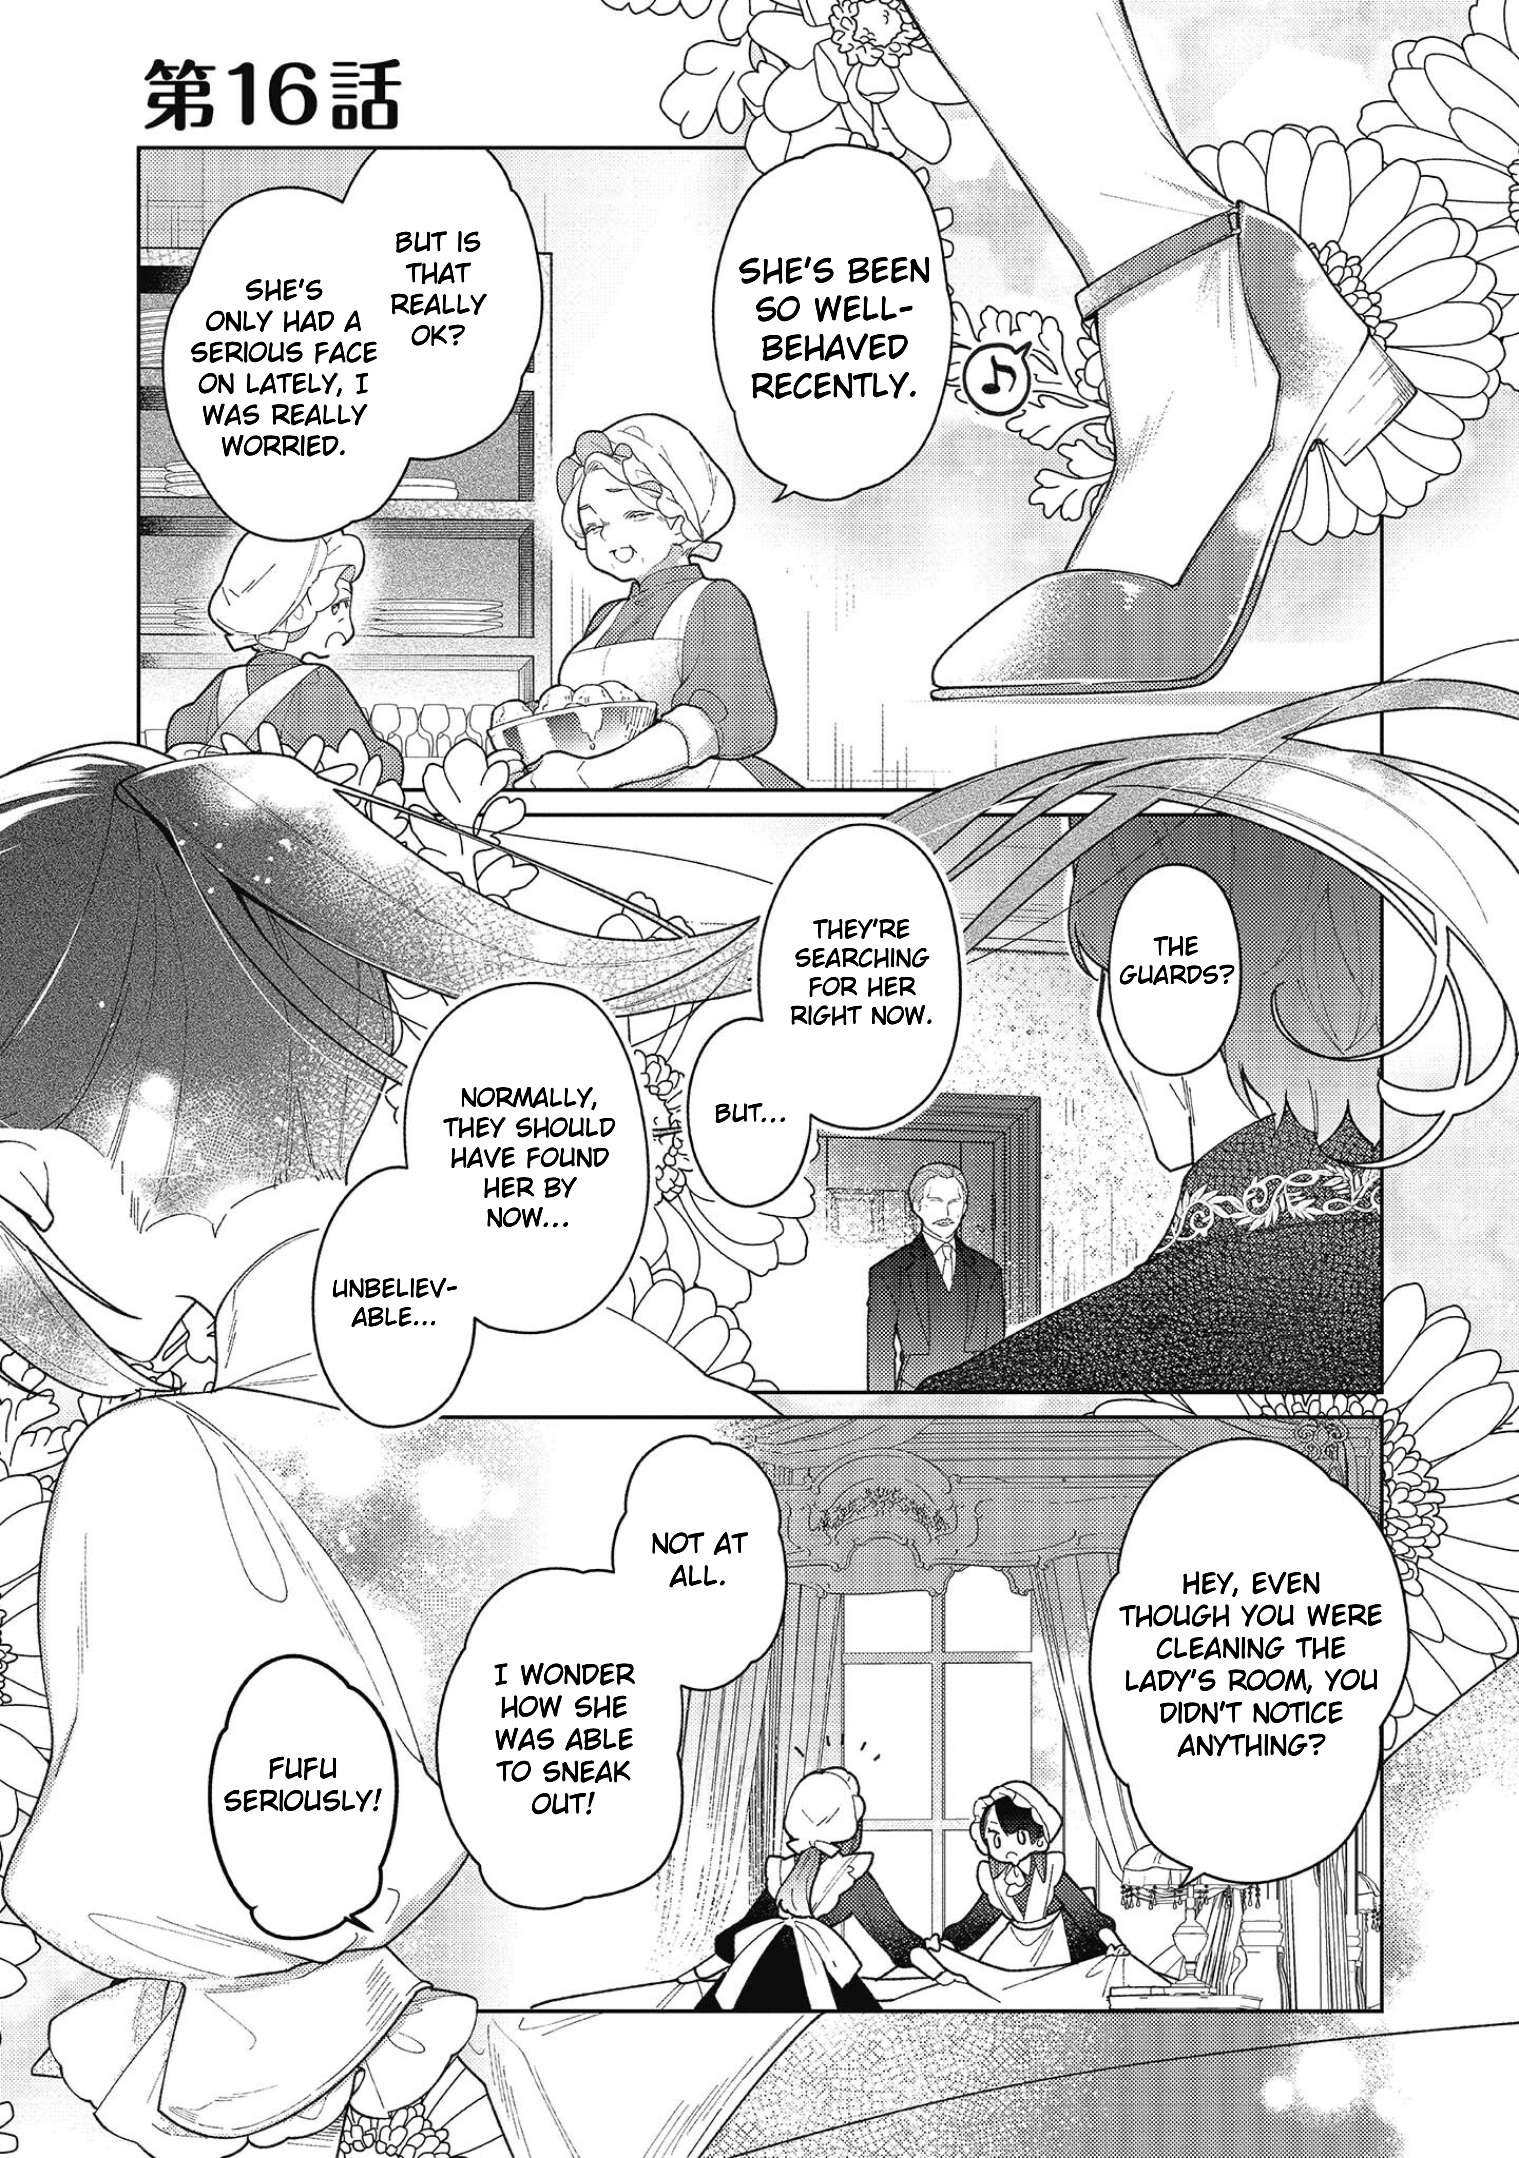 Heroine? Saint? No, I'm an All-Works Maid (Proud)! - chapter 16 - #1